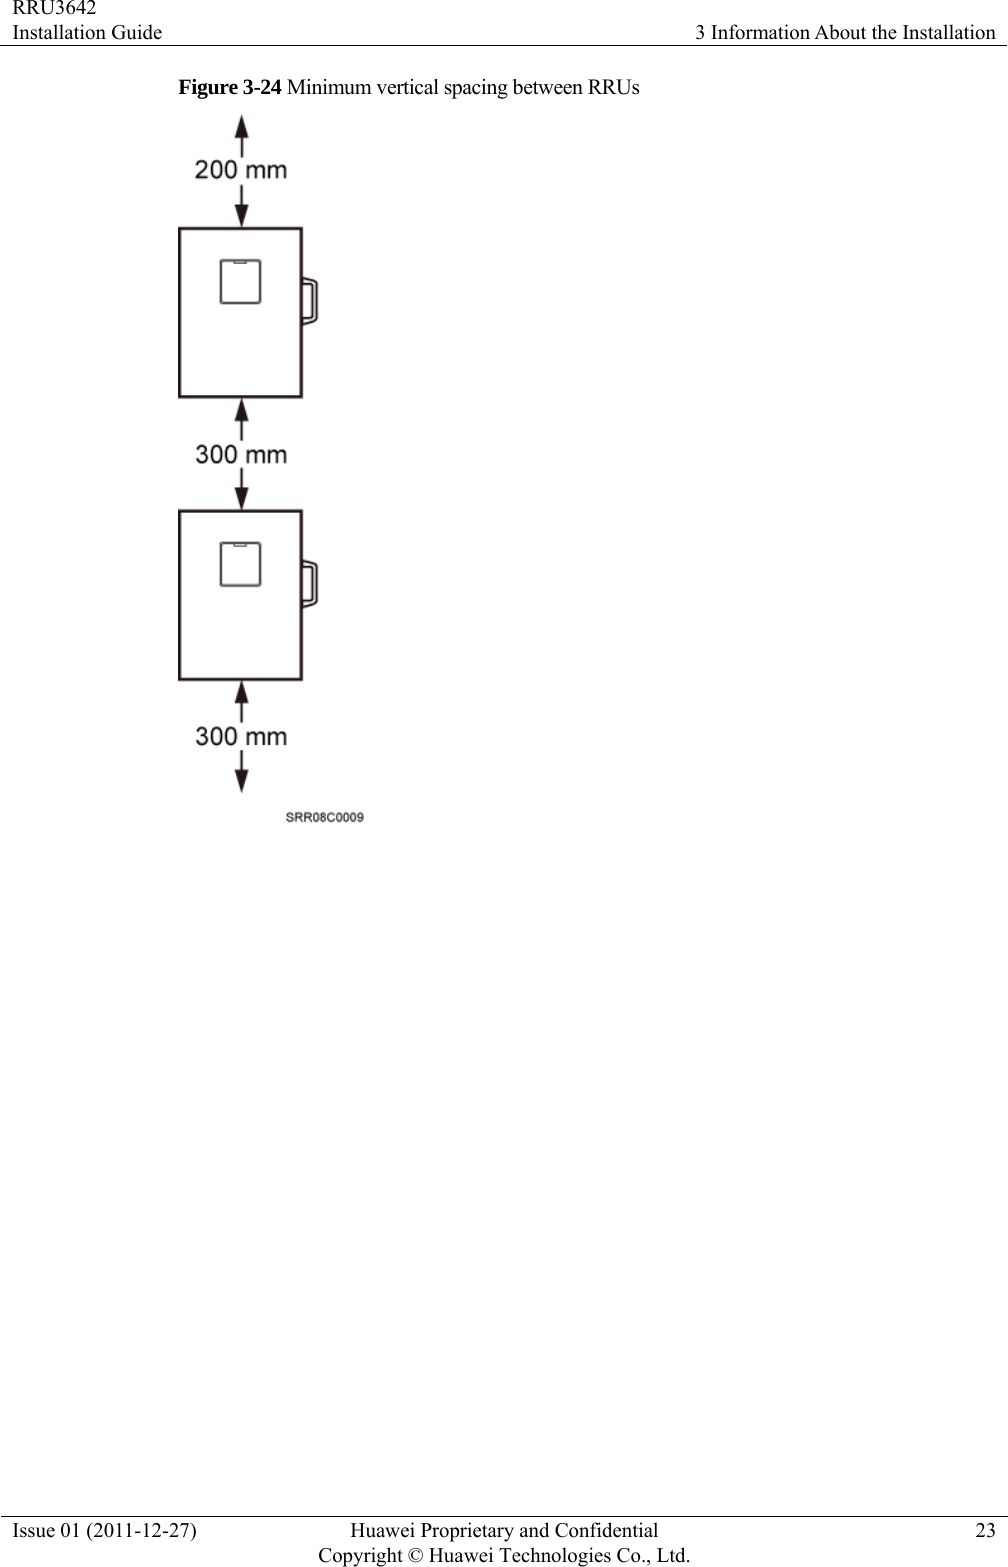 RRU3642 Installation Guide  3 Information About the Installation Issue 01 (2011-12-27)  Huawei Proprietary and Confidential         Copyright © Huawei Technologies Co., Ltd.23 Figure 3-24 Minimum vertical spacing between RRUs  